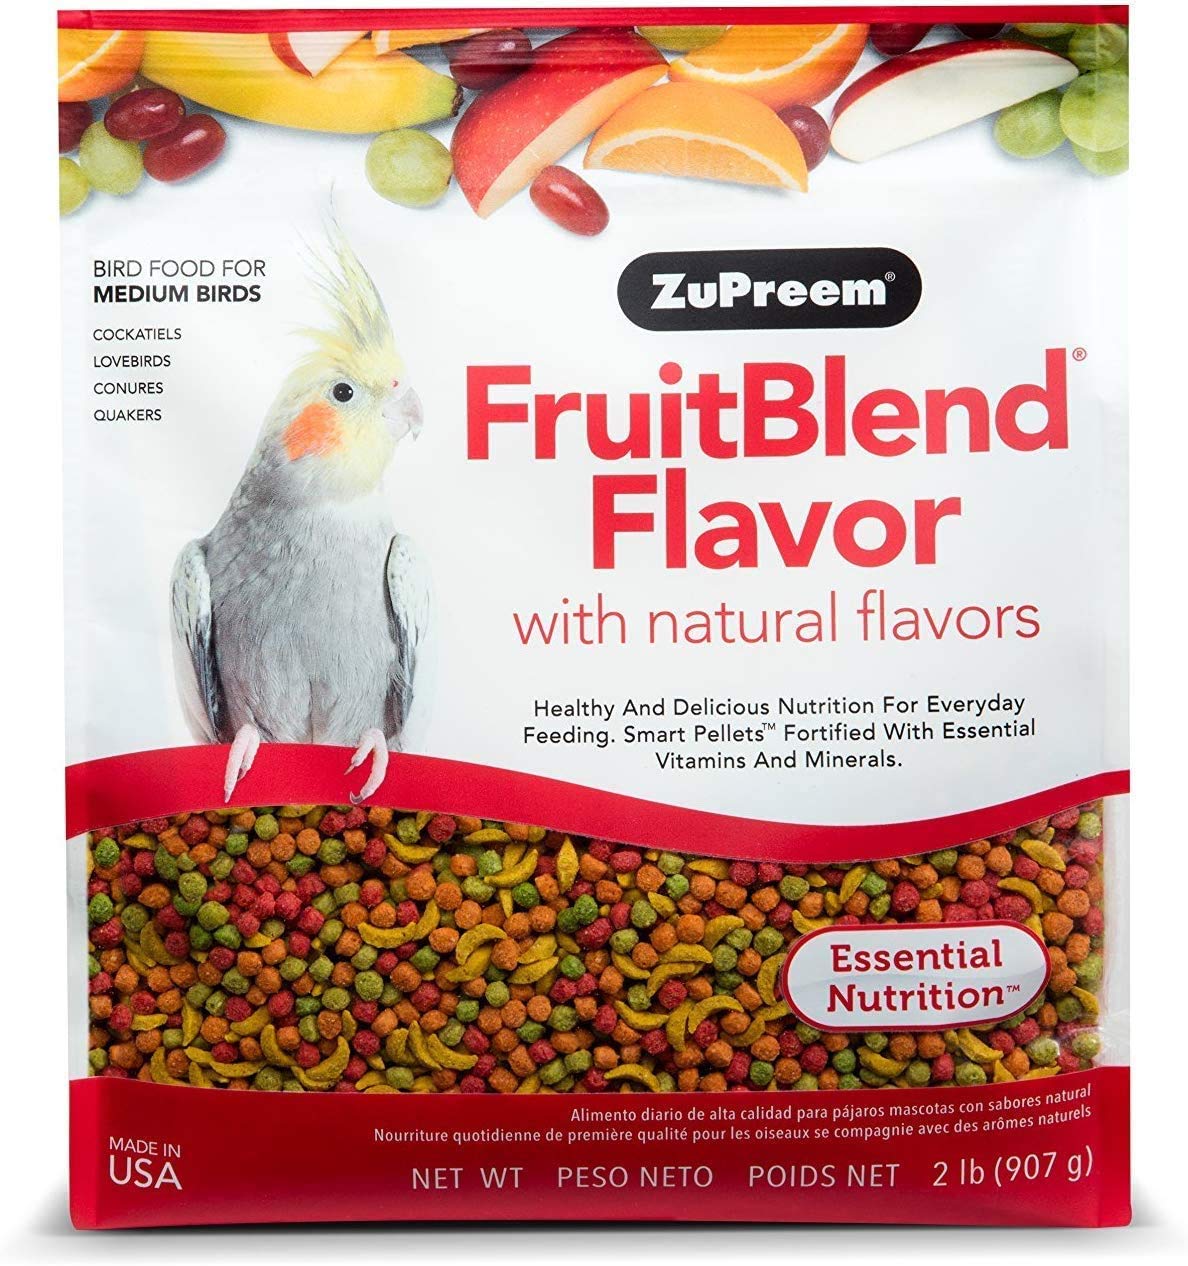 ZuPreem FruitBlend Flavor Pellets Bird Food for Medium Birds (Multiple Sizes) - Daily Blend Made in USA for Cockatiels, Quakers, Lovebirds, Small Conures